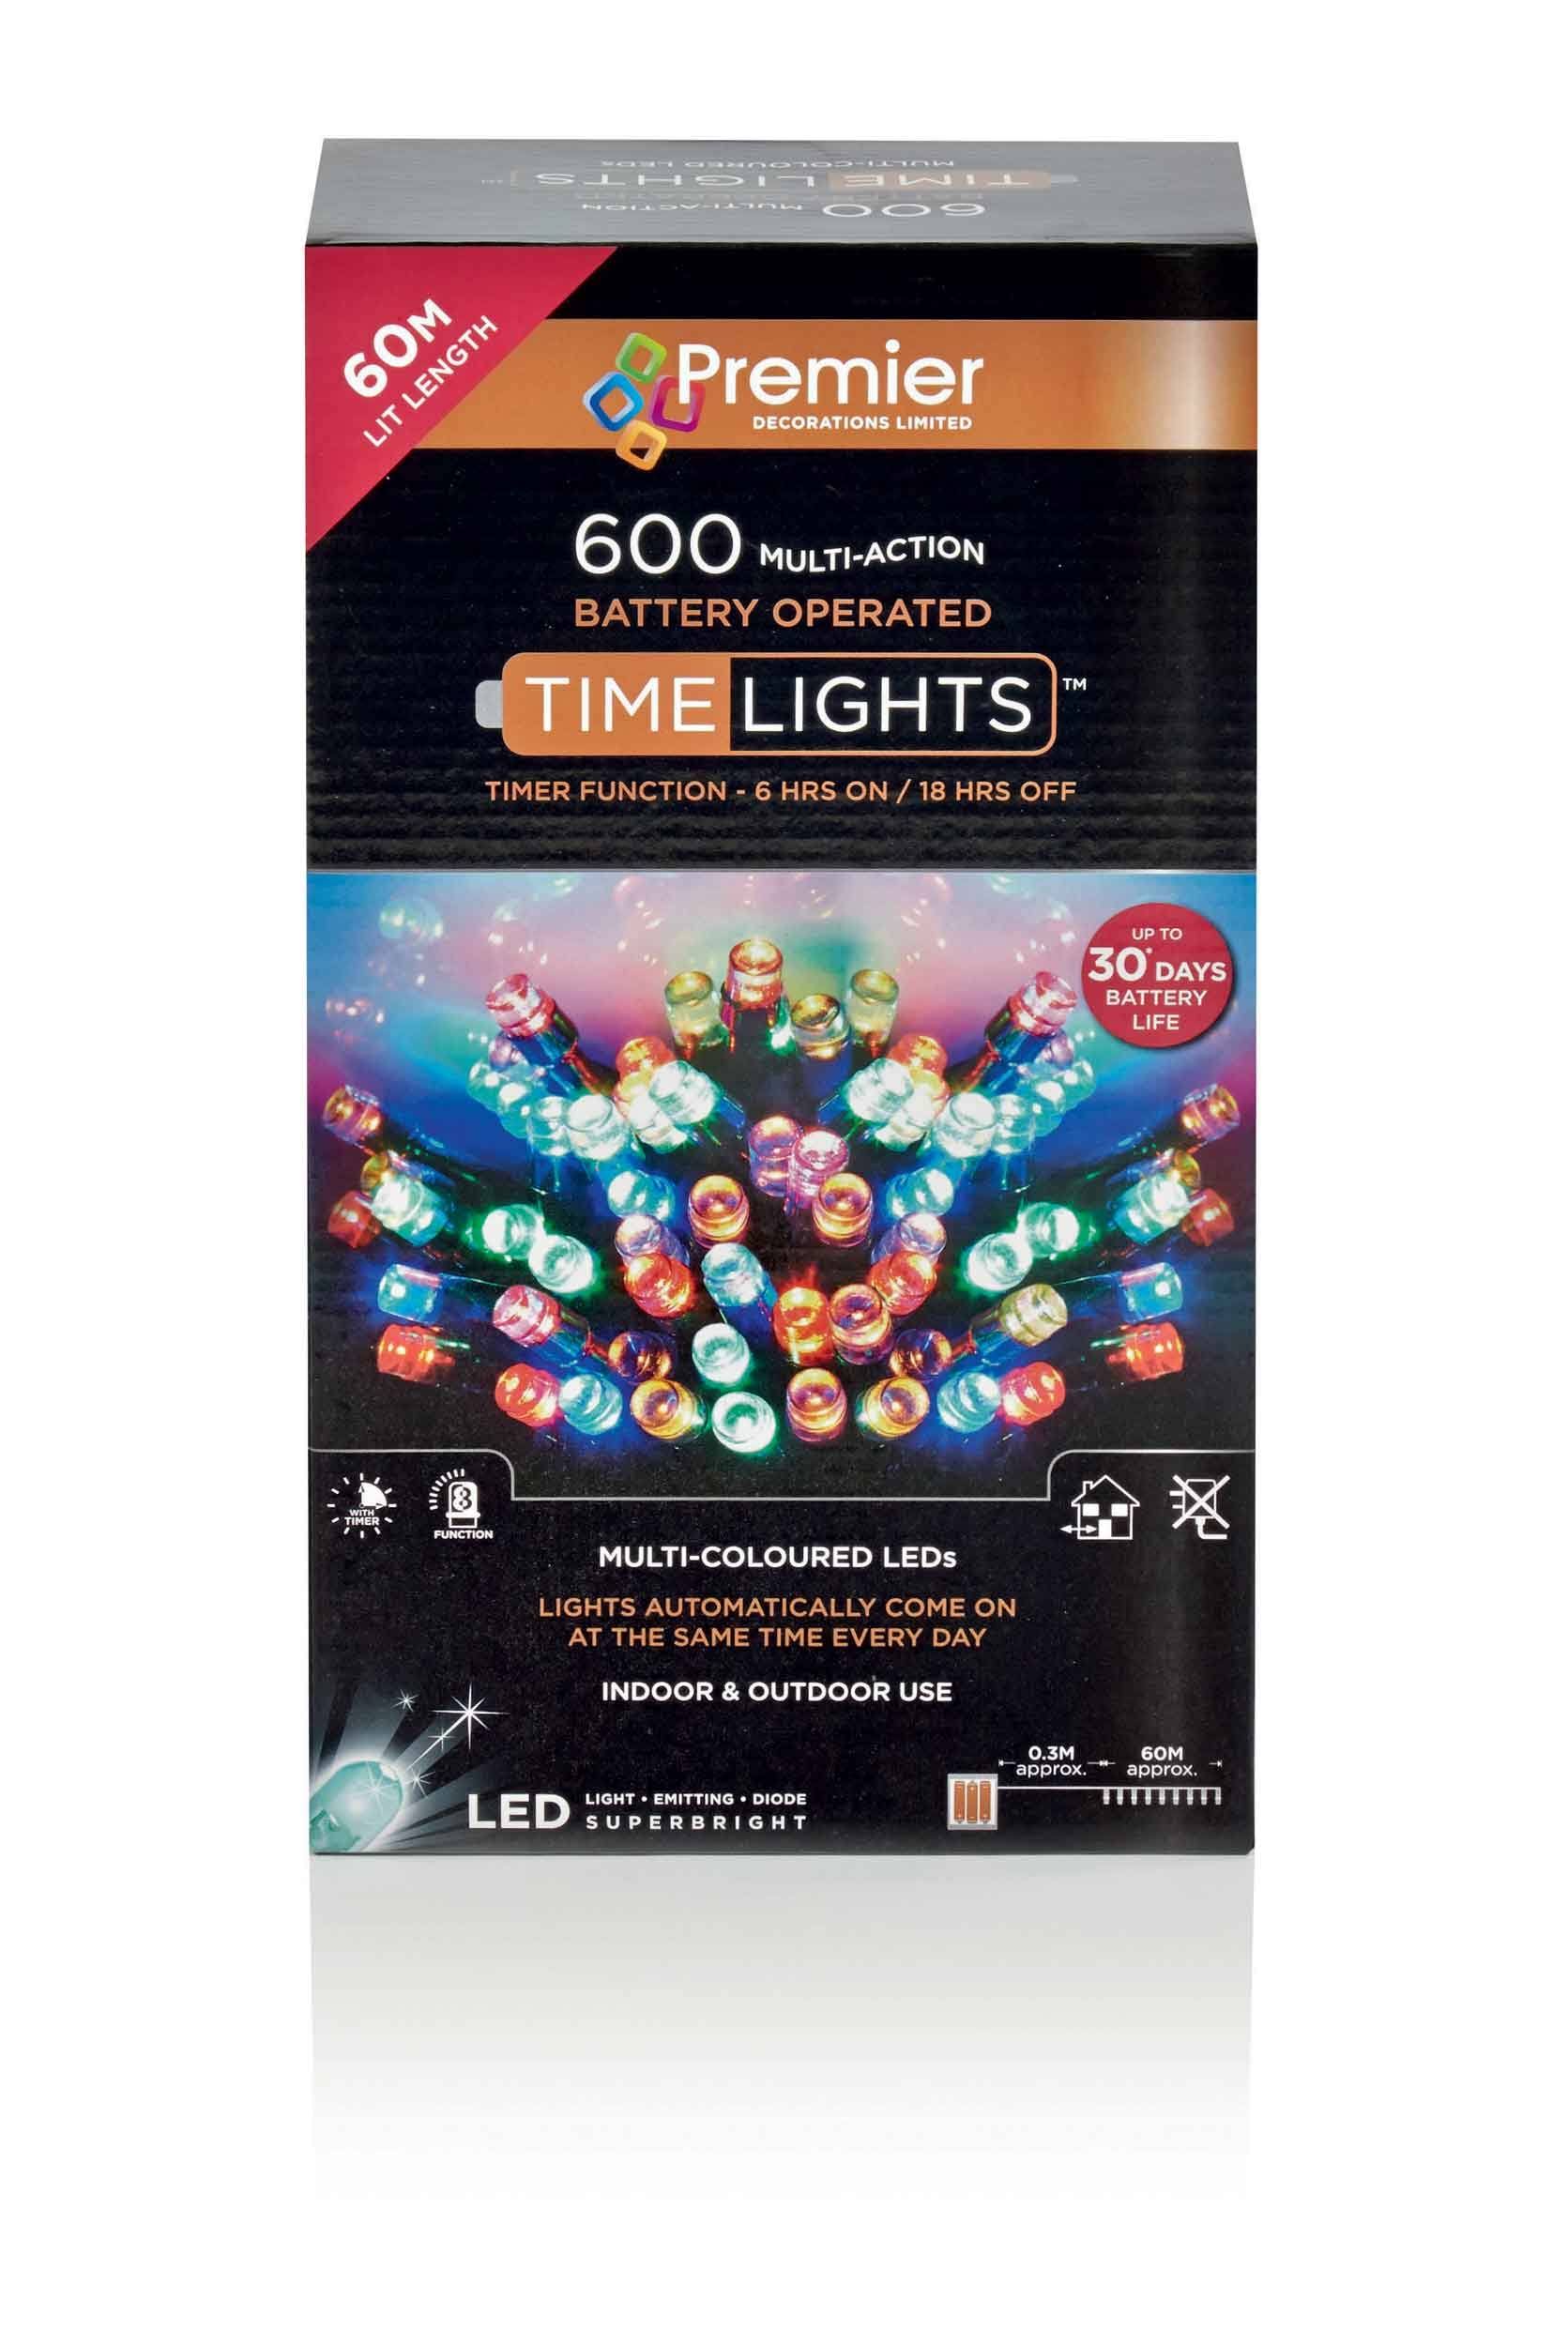 Premier 600 Multi-Action Battery Operated Multi-coloured LED Lights